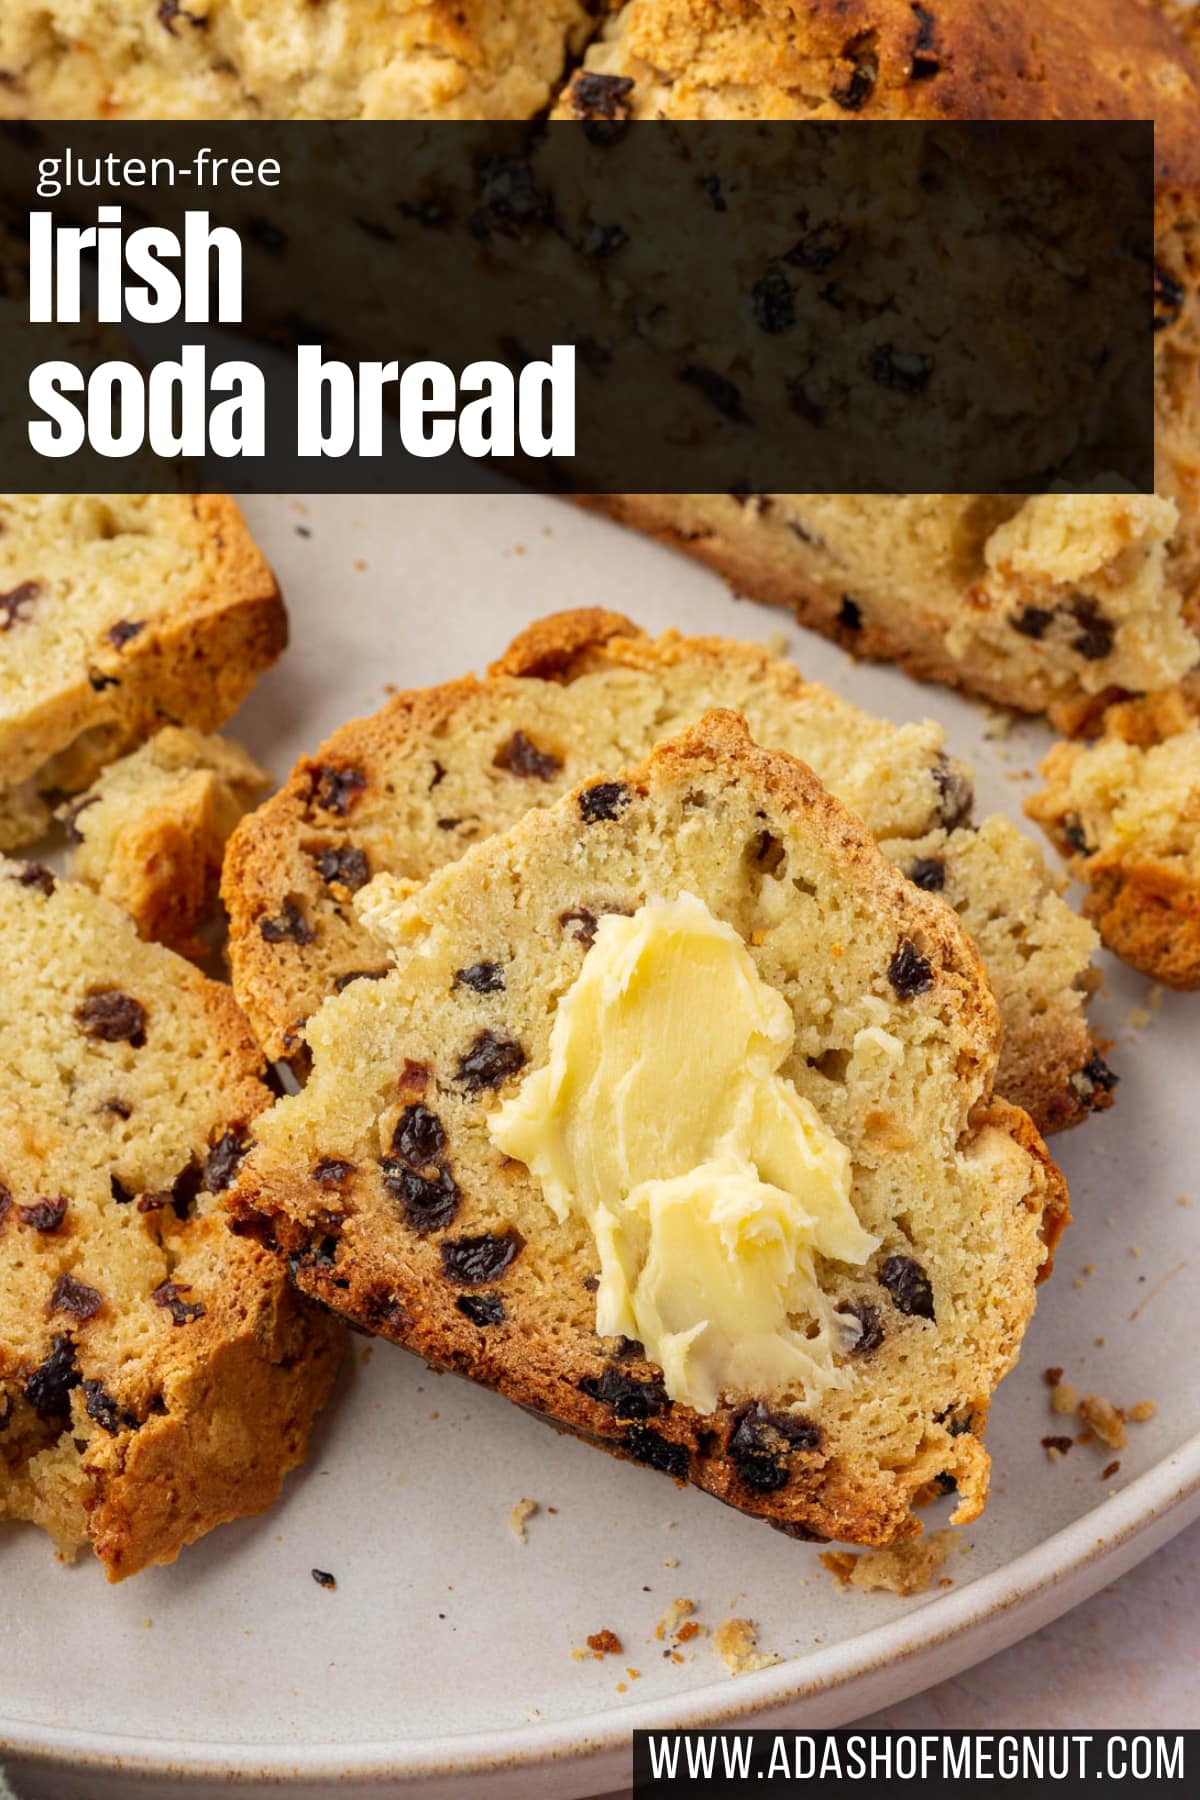 A plate of slices Irish soda bread with currants, with one topped with a slather of Irish butter.